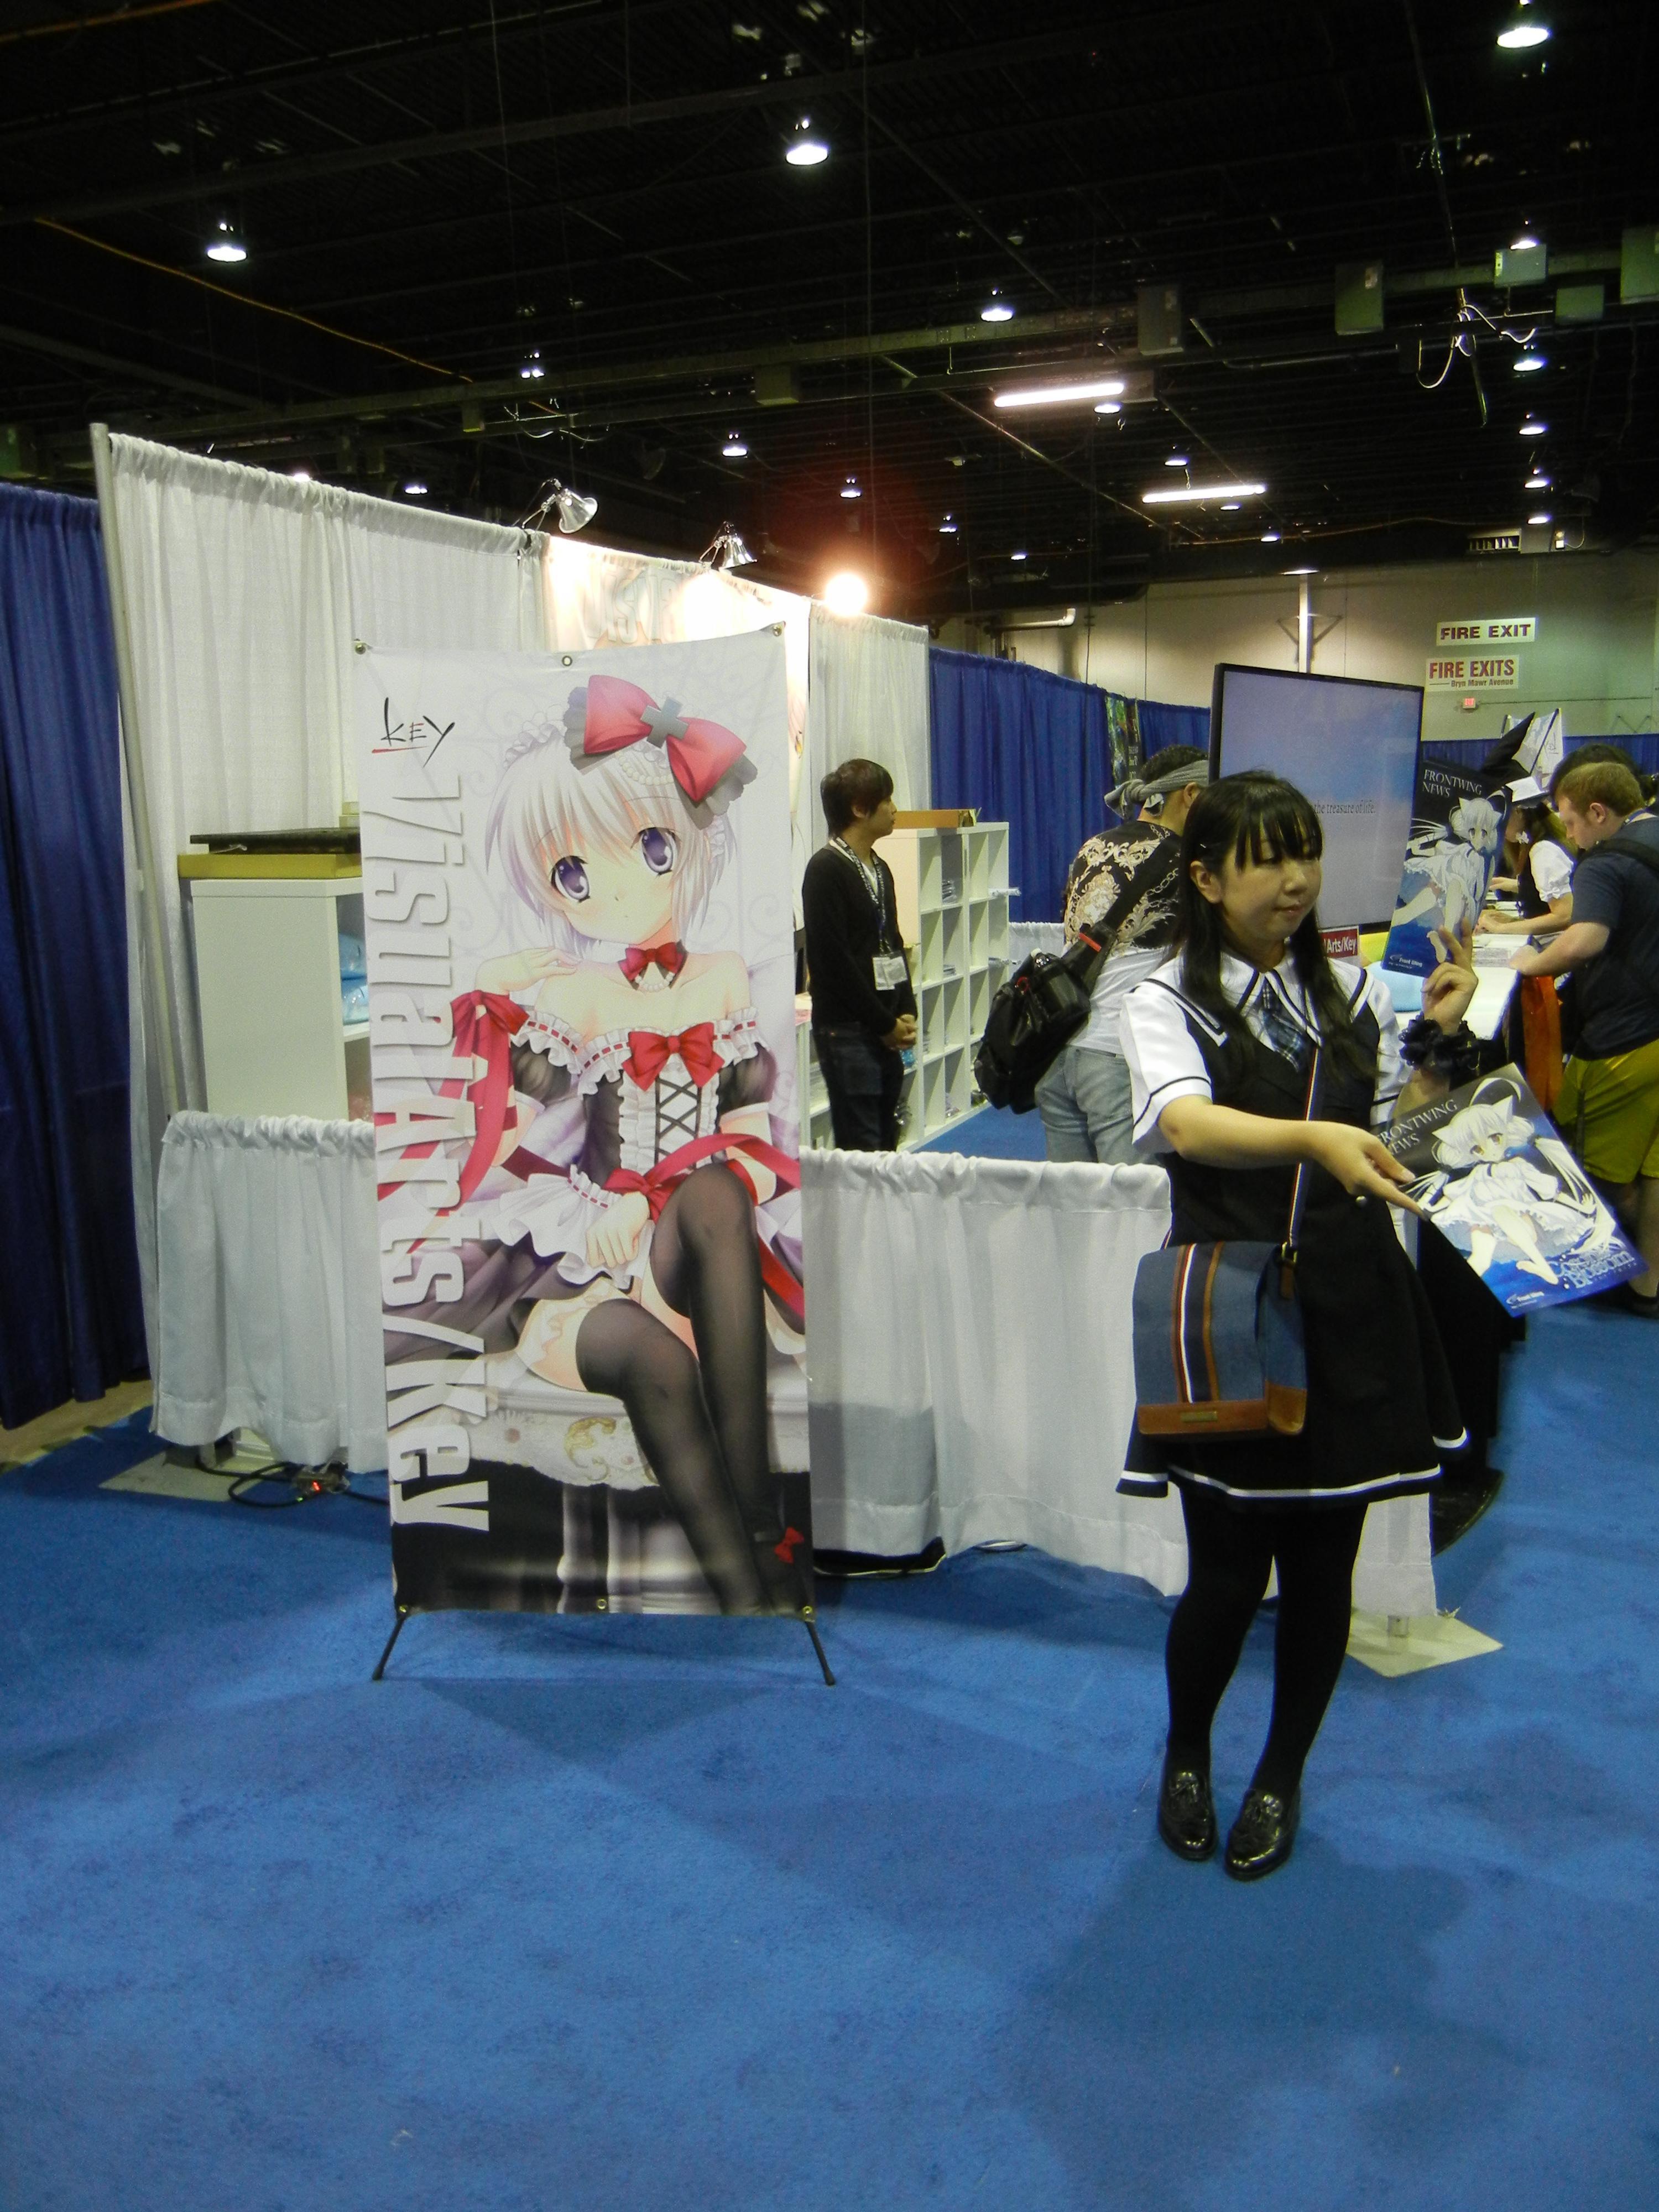 Announcements from Anime Expo 2016! – MangaGamer Staff Blog